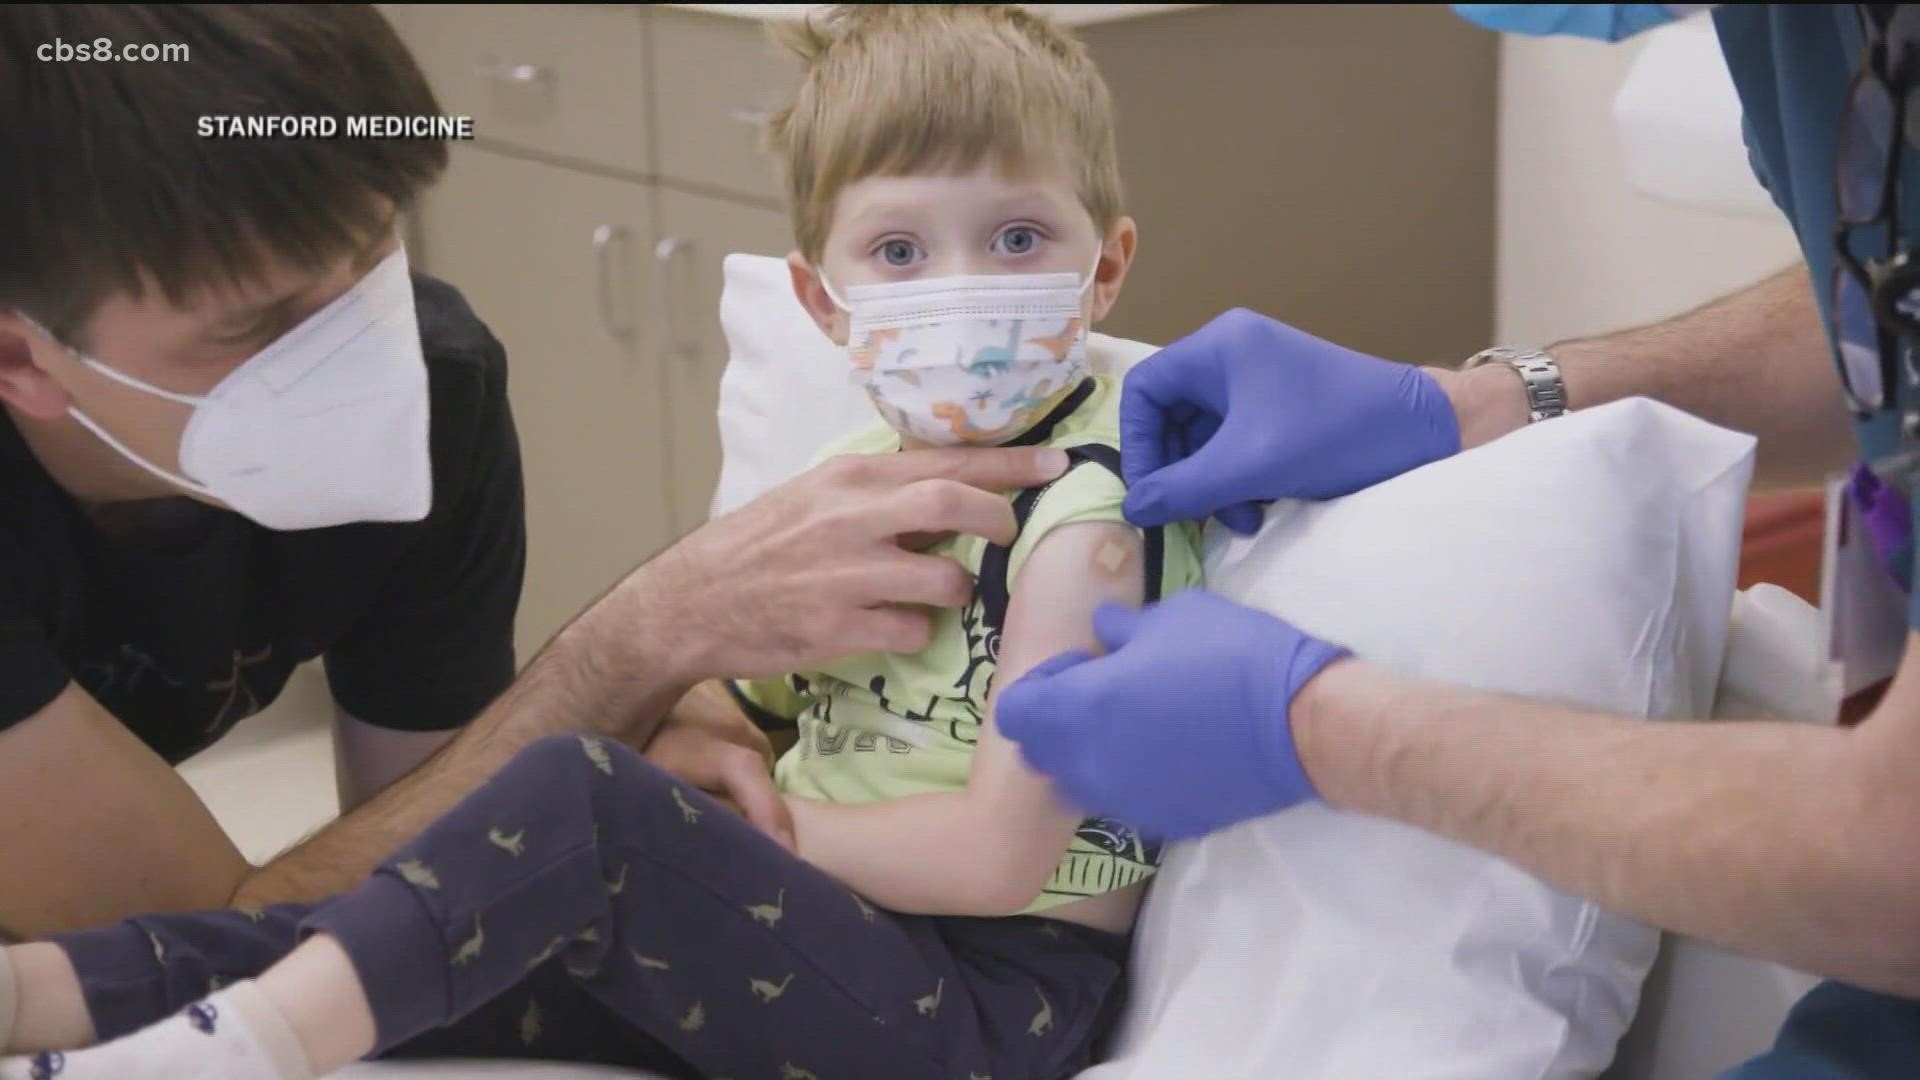 Many parents said they’re feeling stuck with no options after the announcement from Governor Newsom mandating vaccinations.